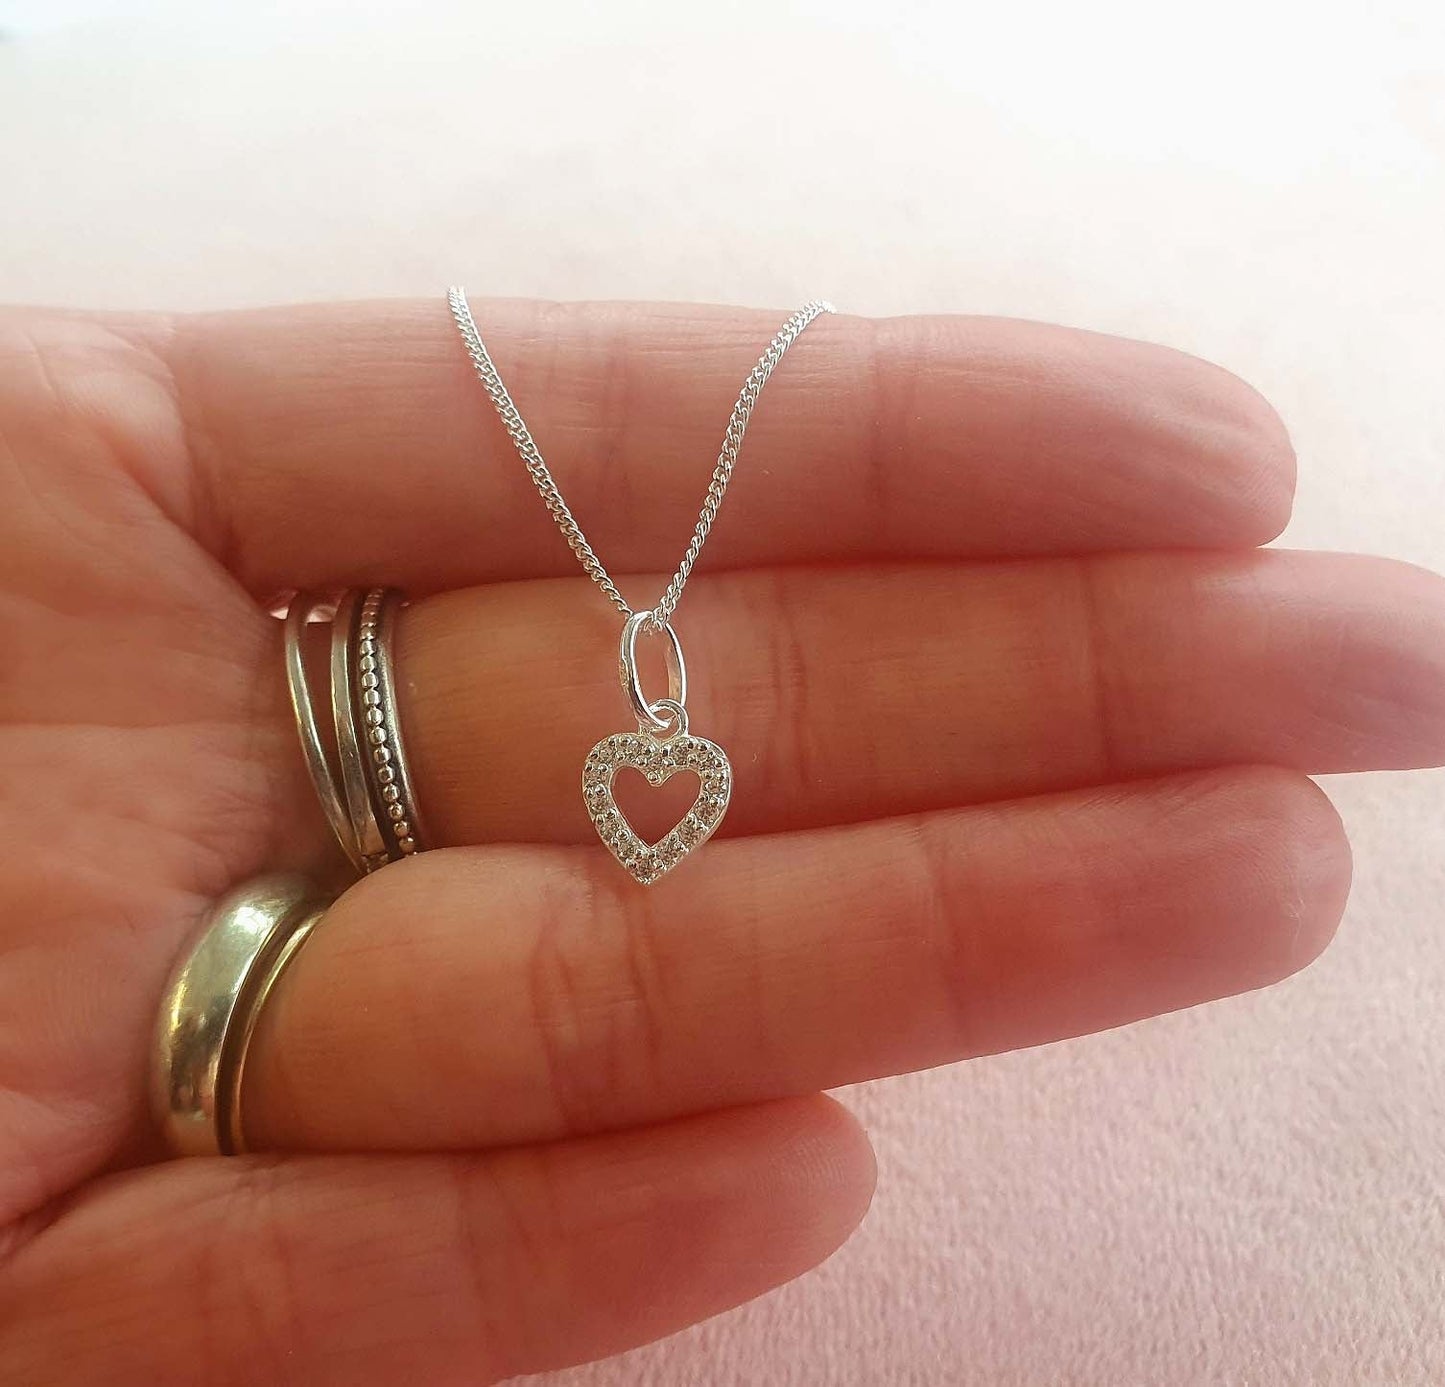 Maid of Honour CZ Heart Necklace in Sterling Silver 925, Personalised Gift